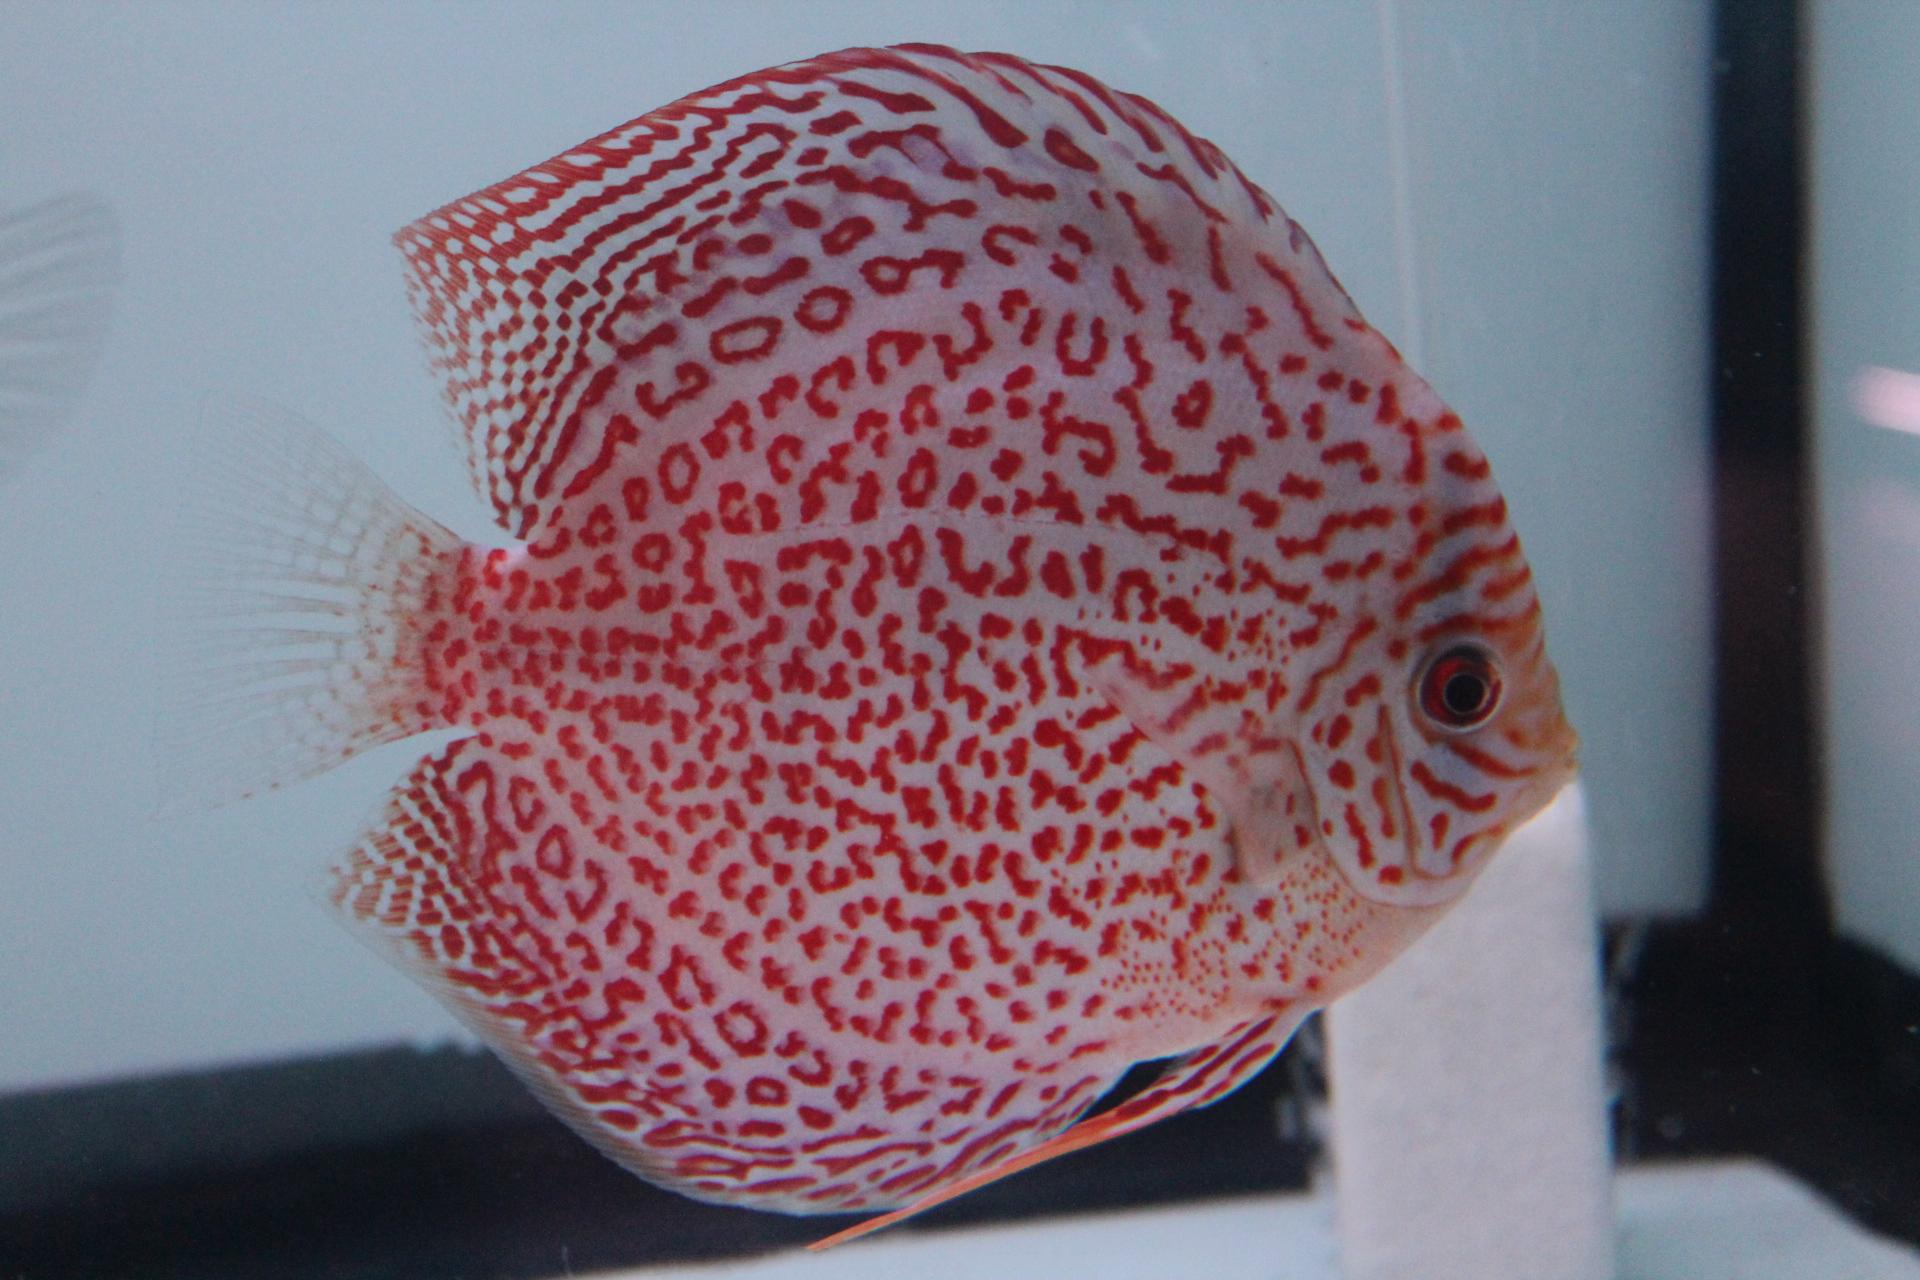 Welcome to JAVED FISHERIES - We are breeder, wholesale, dealer, collector,  supplier, importer for tropical fish. We can supply discus fish like super  red melon, yellow face red melon, marlboro red, blue